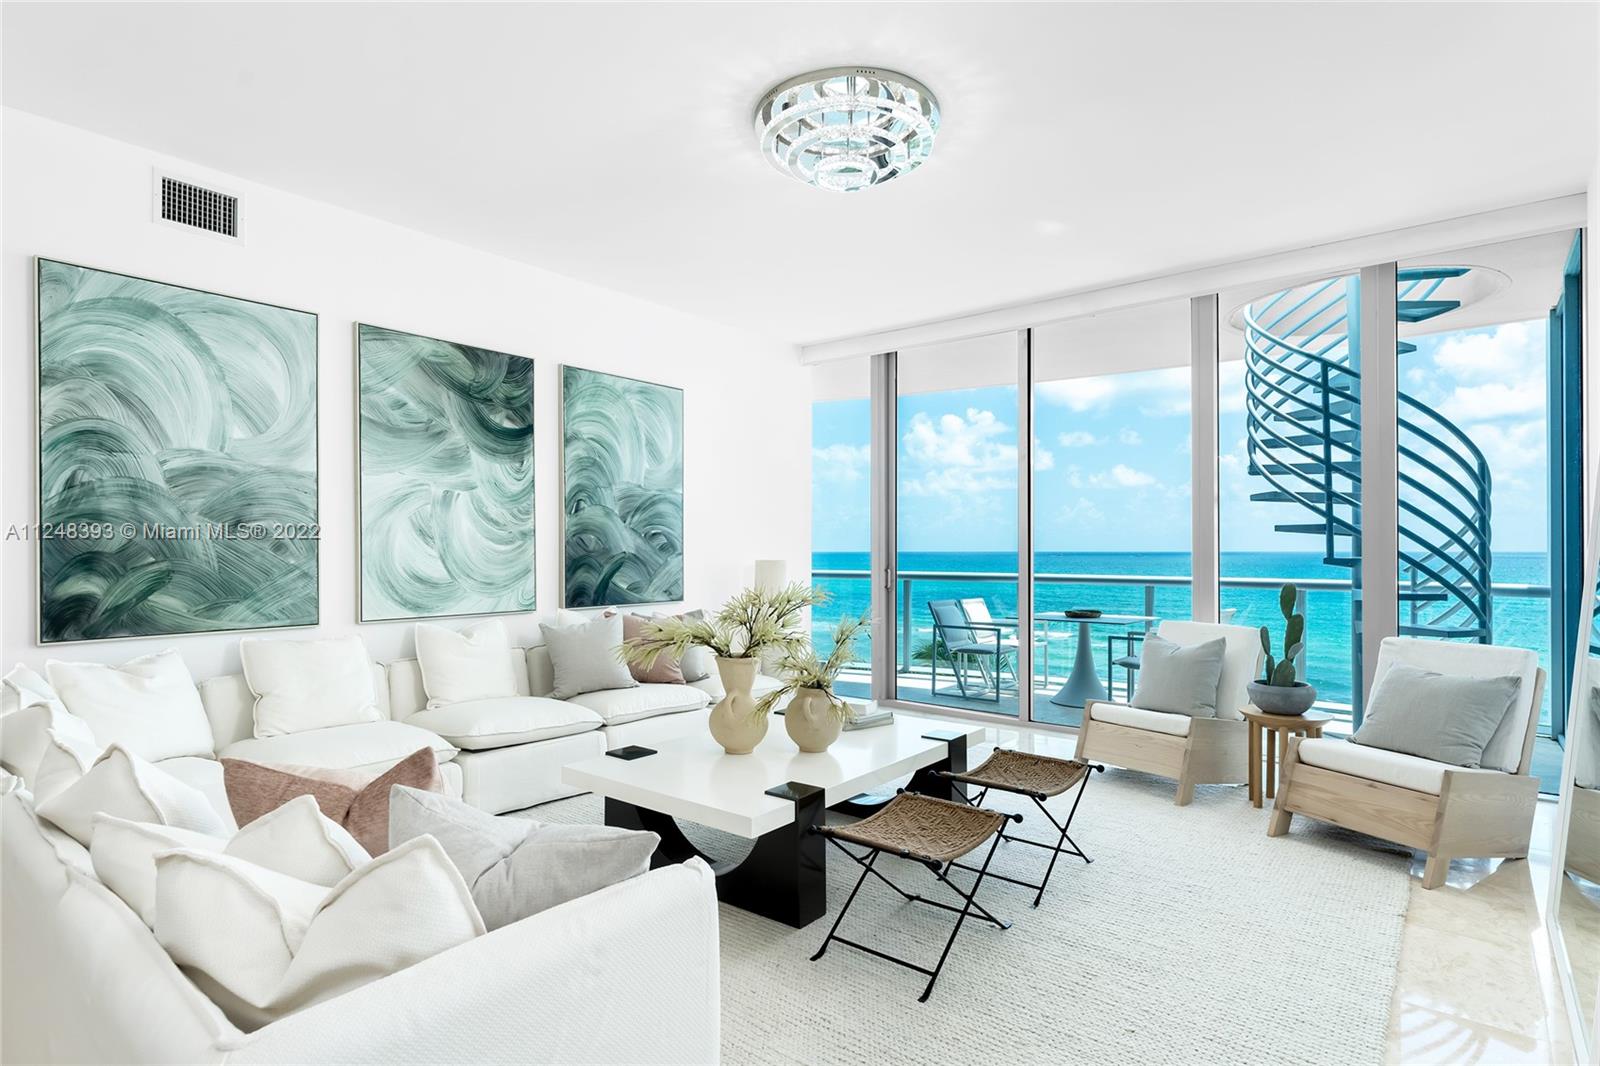 Listing Image 6799 Collins Ave #504